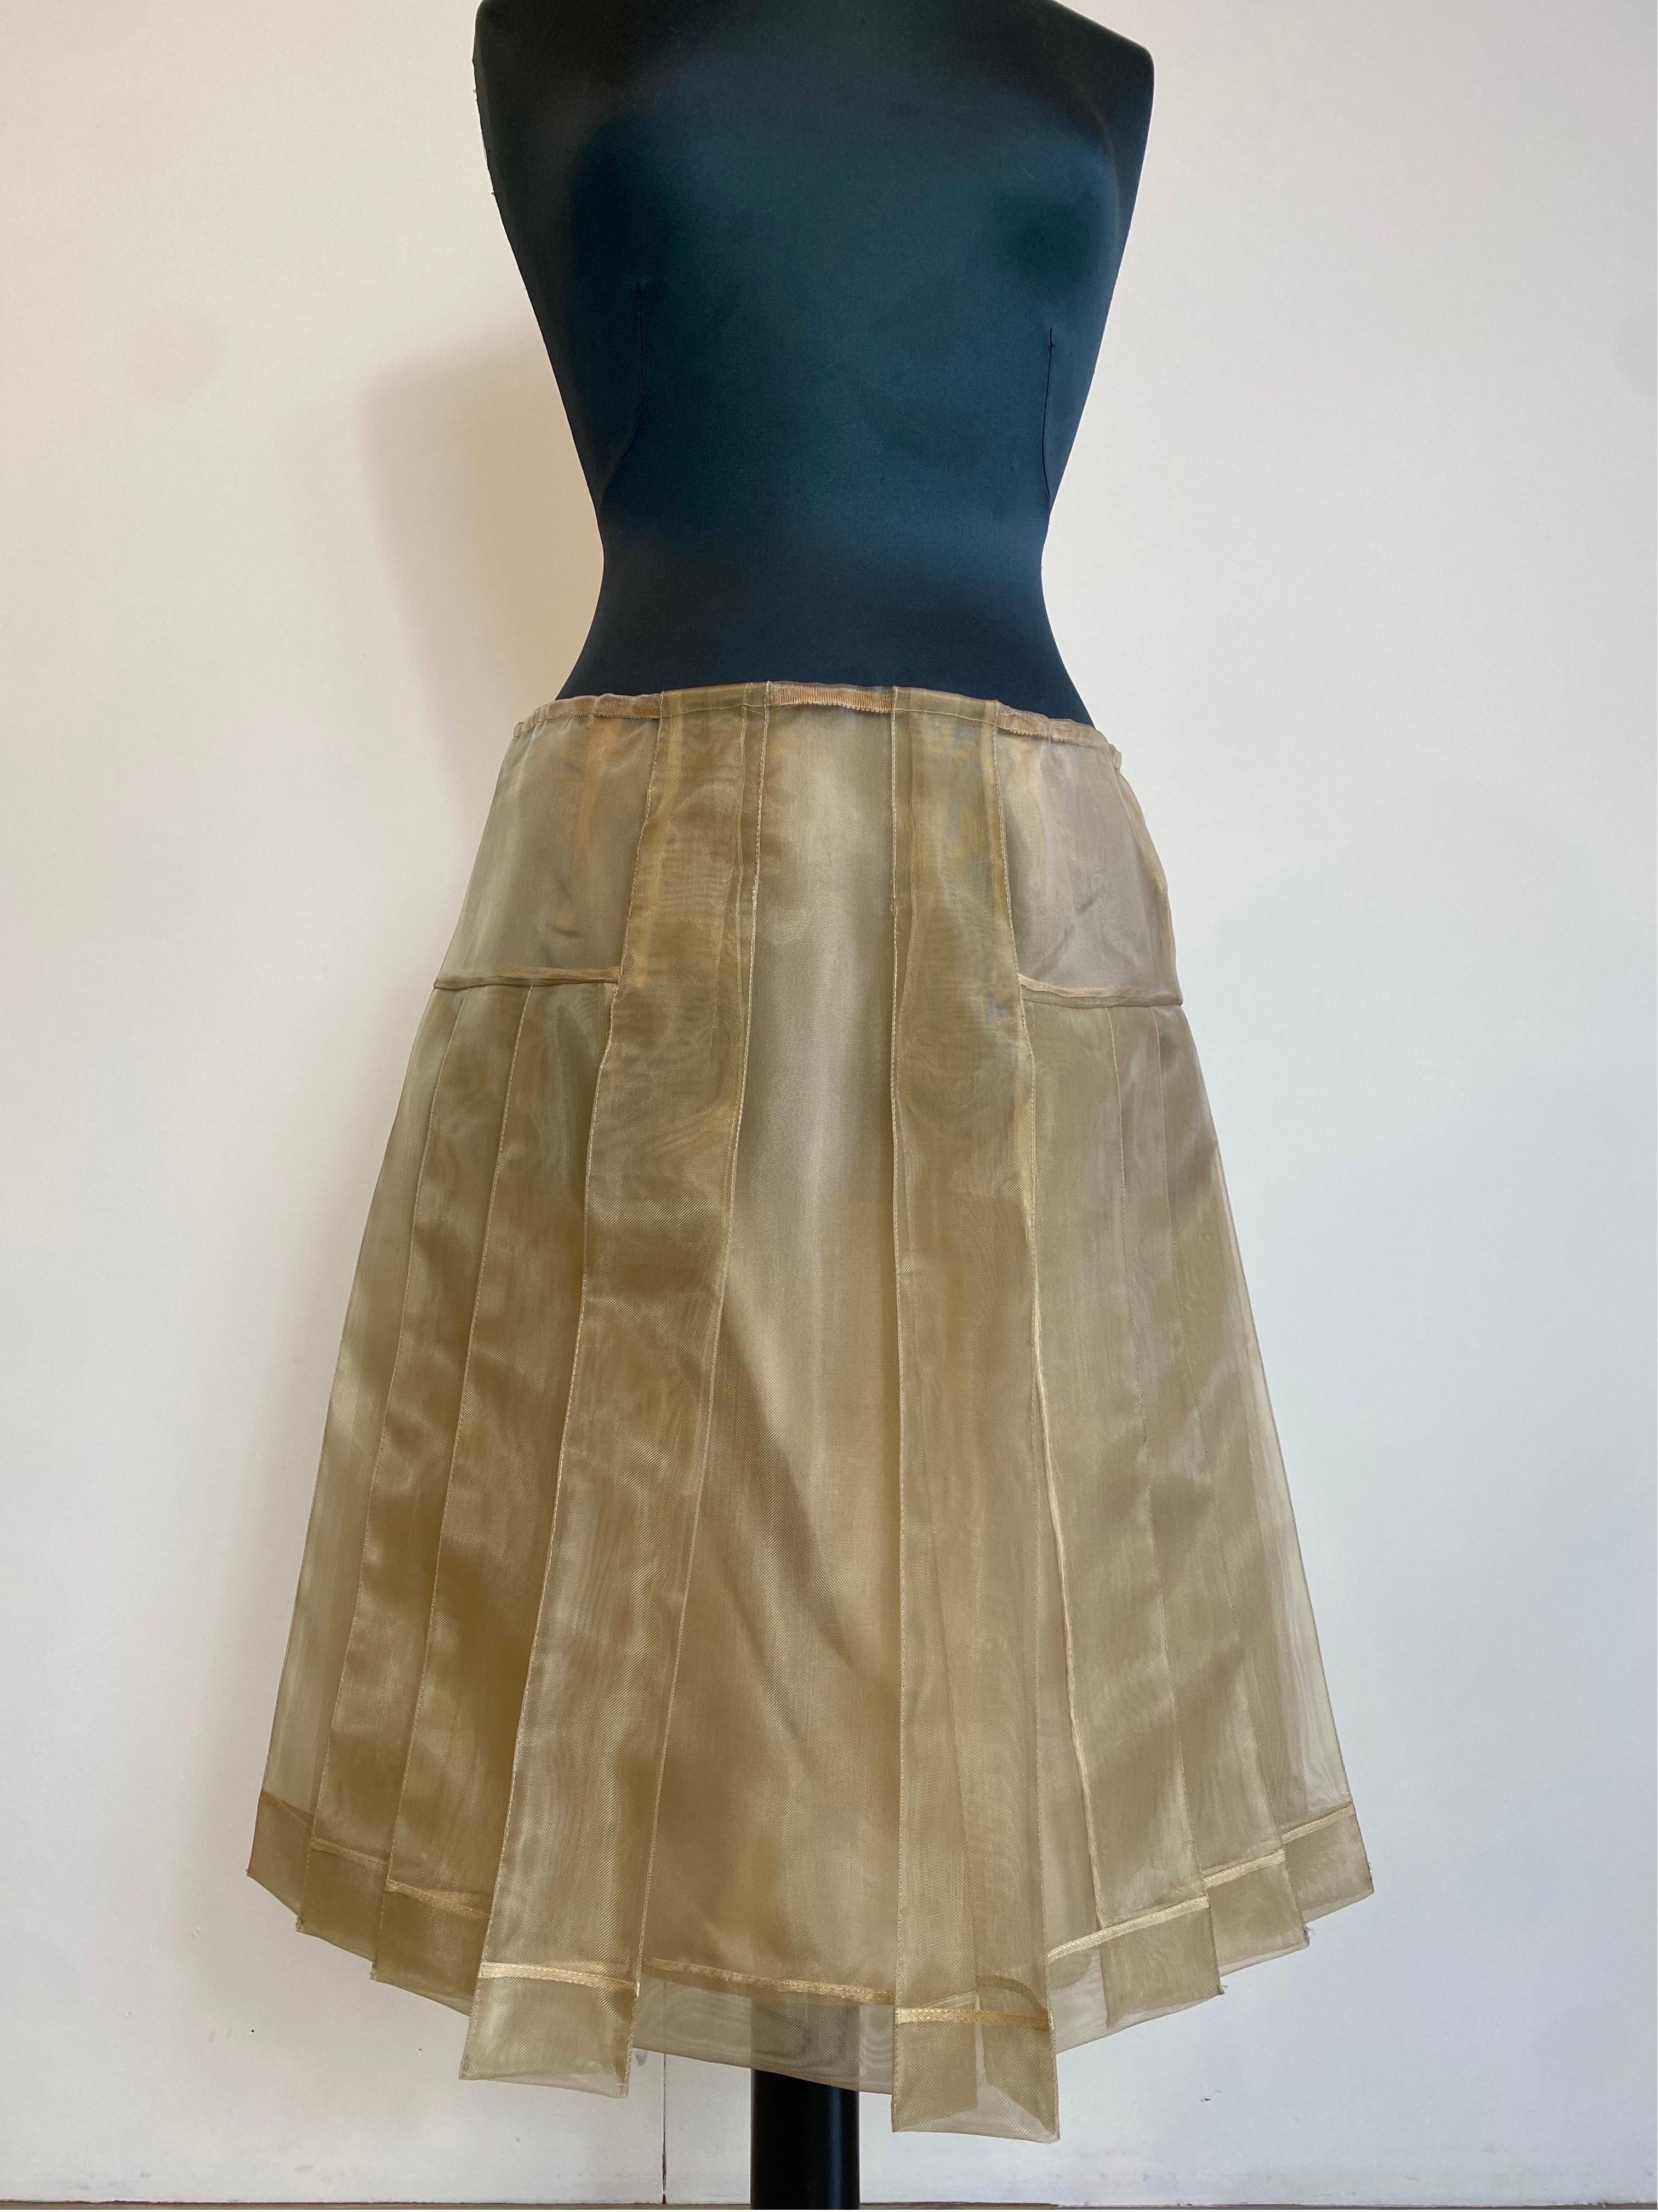 Miu Miu Spring Summer 2000 pleated Beige Skirt In New Condition For Sale In Carnate, IT